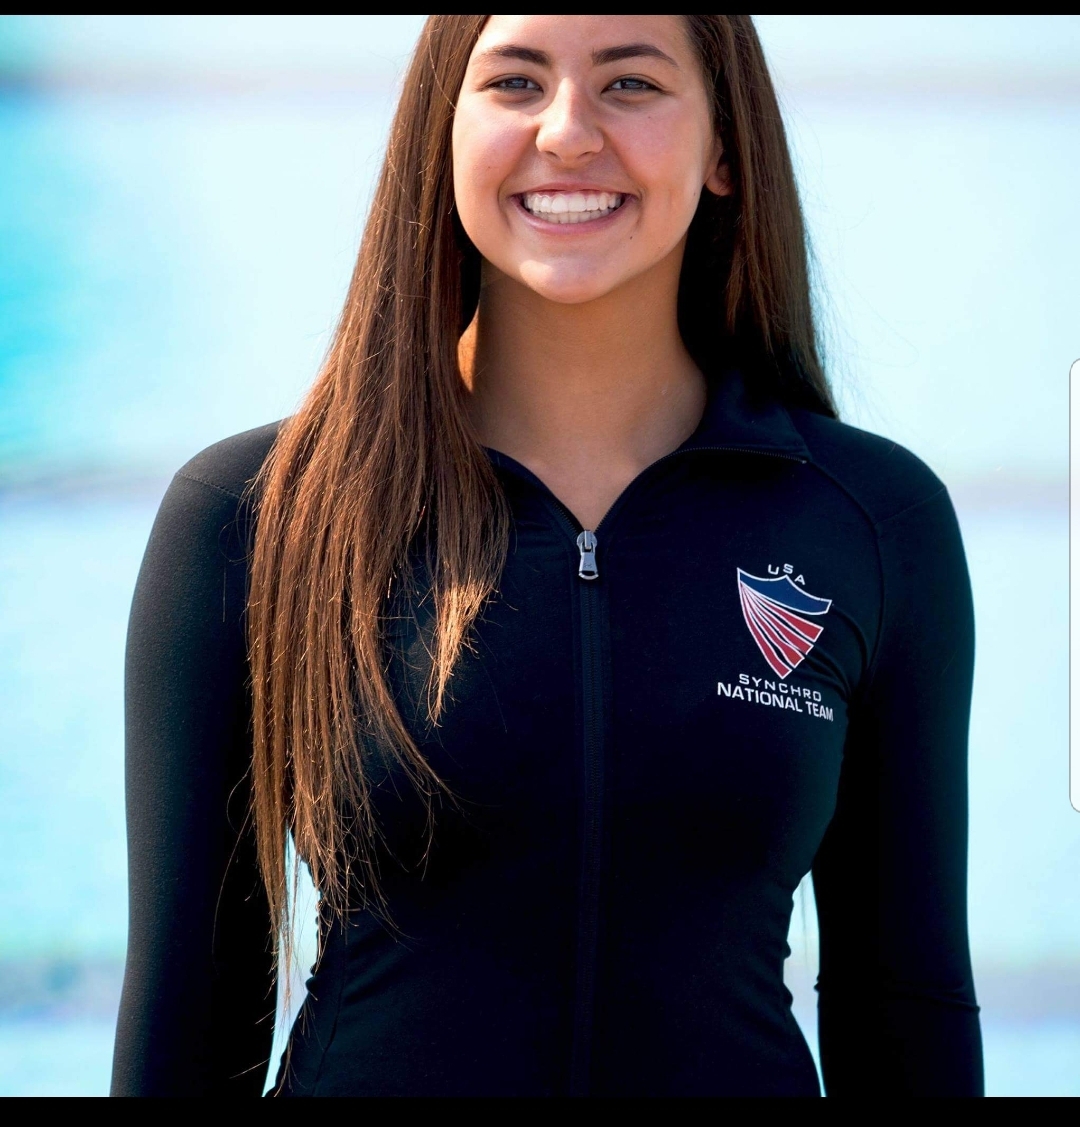 Palm Coast senior Paige Areizaga has been named to the U.S. synchronized swimming team for the second year in a row. Photo courtesy of Stephanie Sanchez